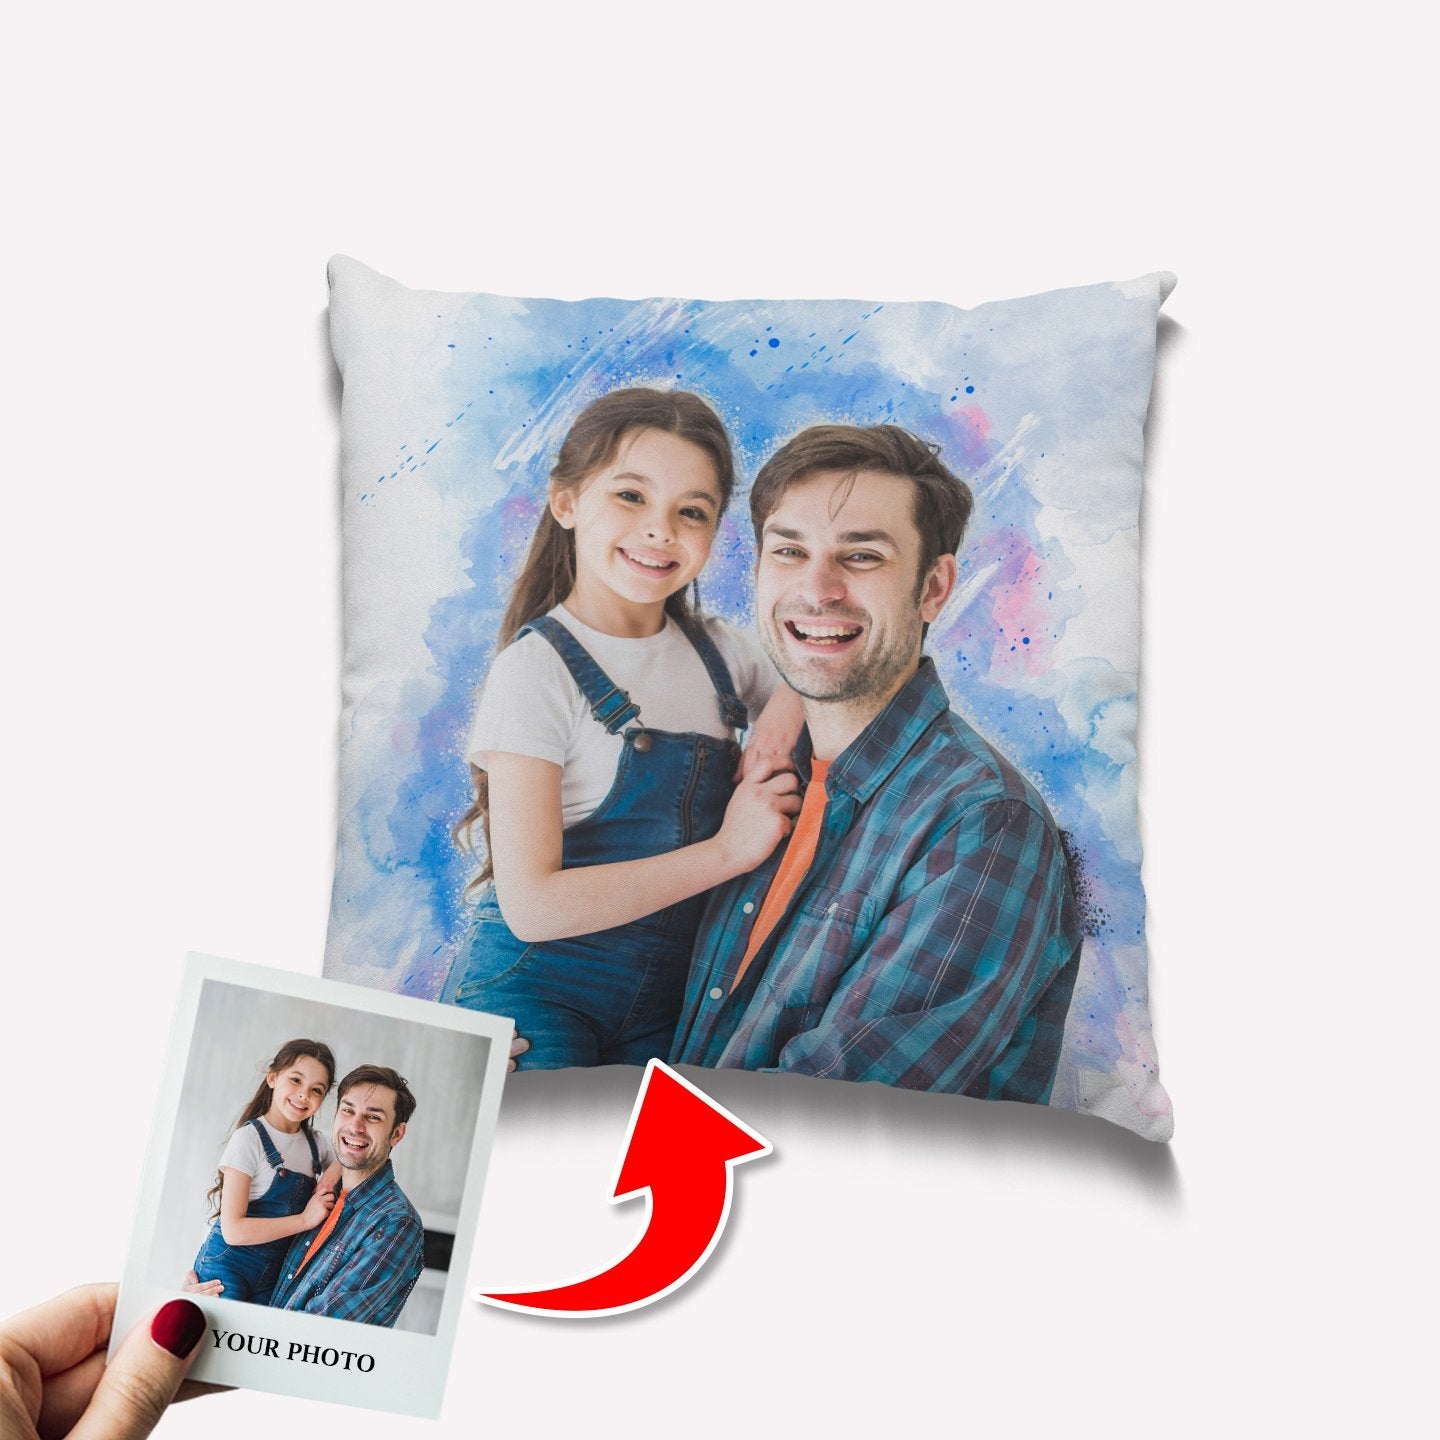 Custom Portrait From Photo, Watercolor, Pillow